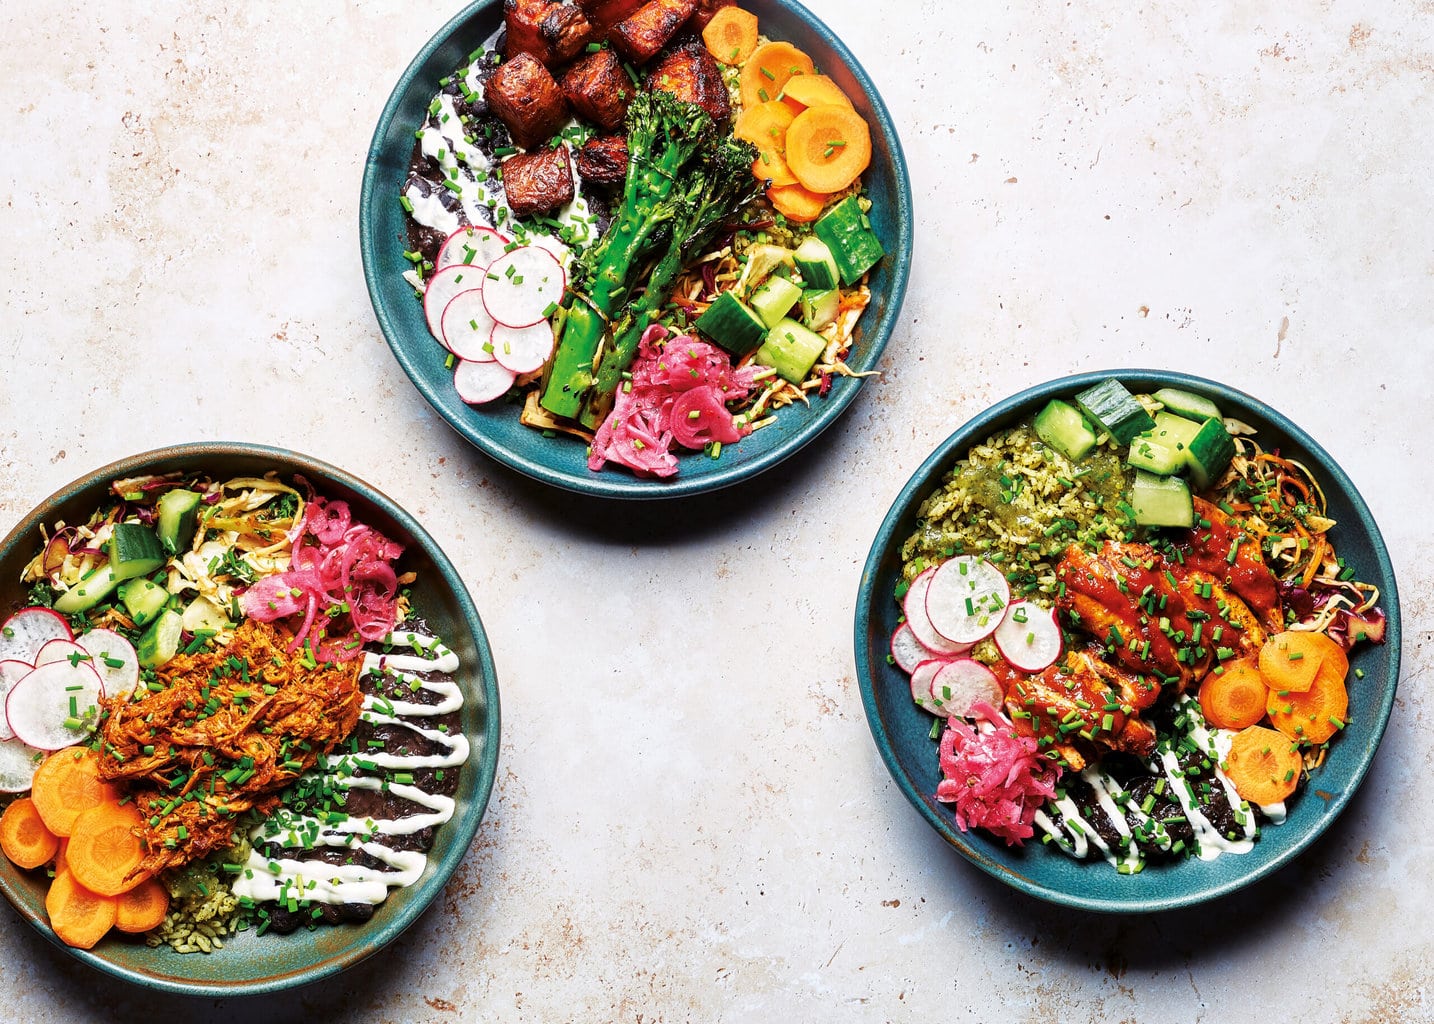 Our three rainbow bowls, packed with fresh vibrant ingredients and topped with broccoli and sweet potato, chicken or pork pibil